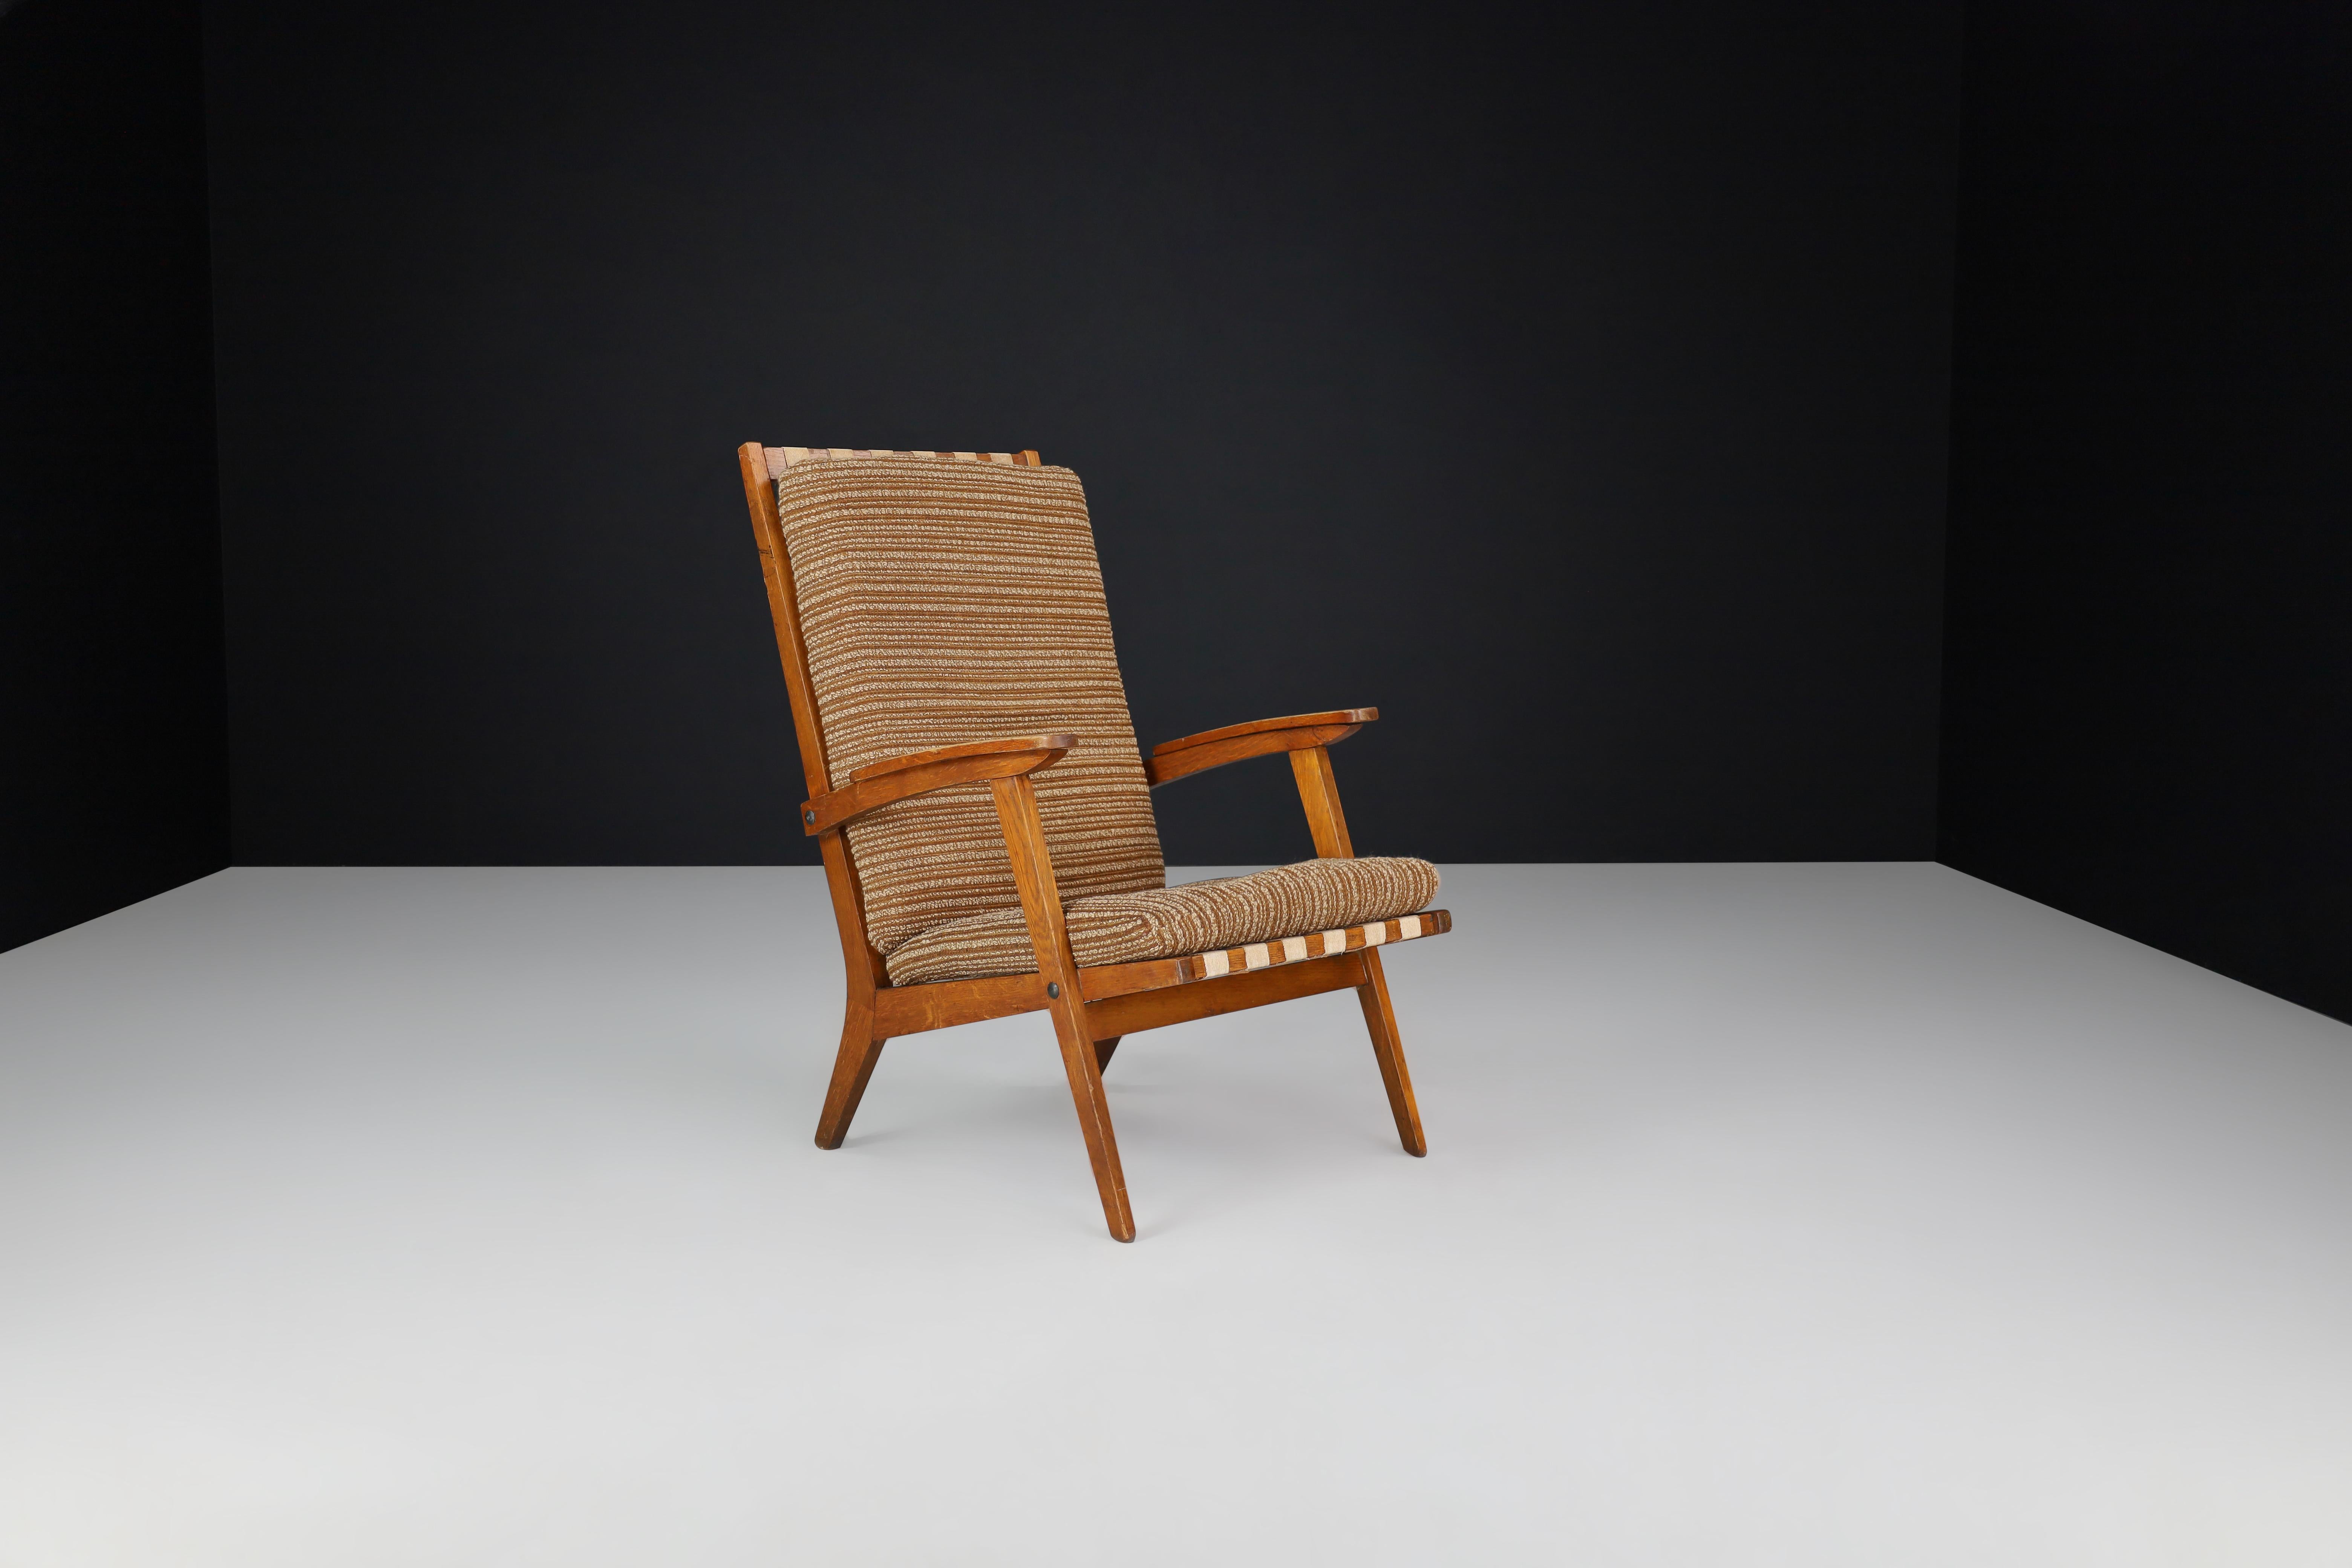 Oak Sculptural Lounge Chairs with Brown Upholstery, France, 1950s For Sale 4